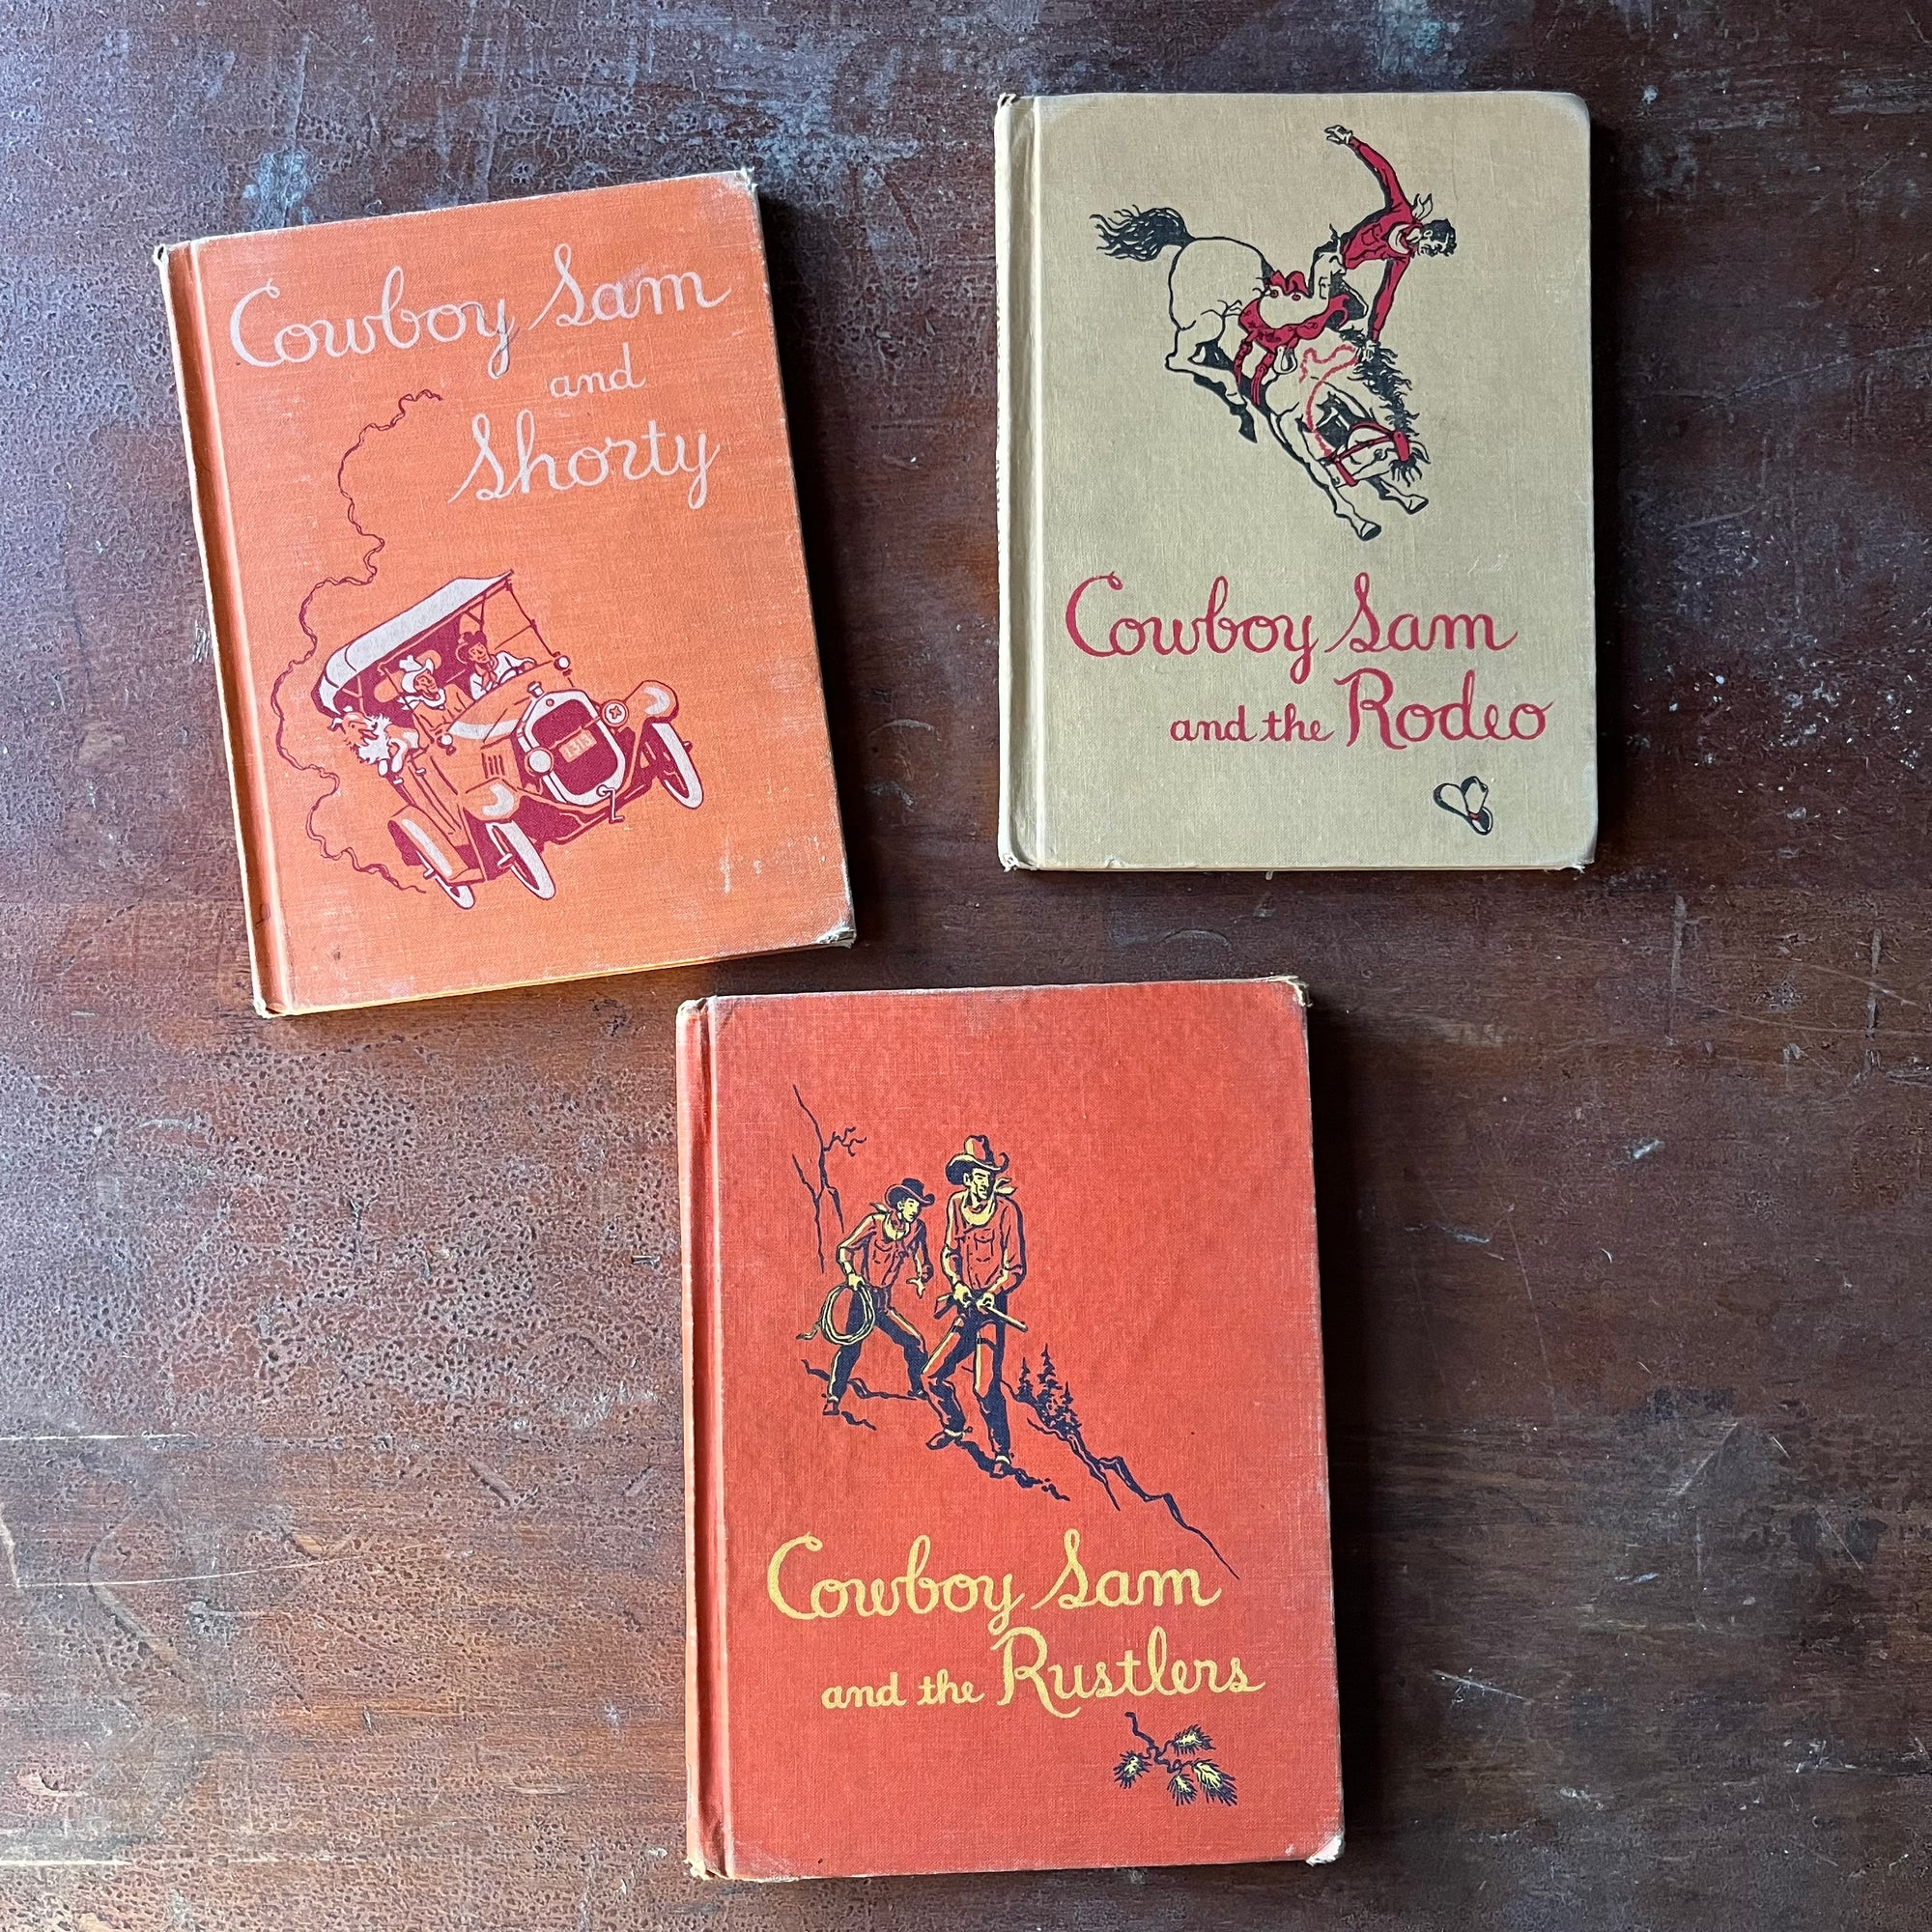 vintage children's early readers - Set of Three Vintage Cowboy Sam Books-Cowboy Sam & the Rodeo, Cowboy Sam & the Rustlers & Cowboy Sam and Shorty written by Edna Walker Chandler with illustrations by Jack Merryweather - view of the front covers with the title of each book in a decorative font & an illustration from each story